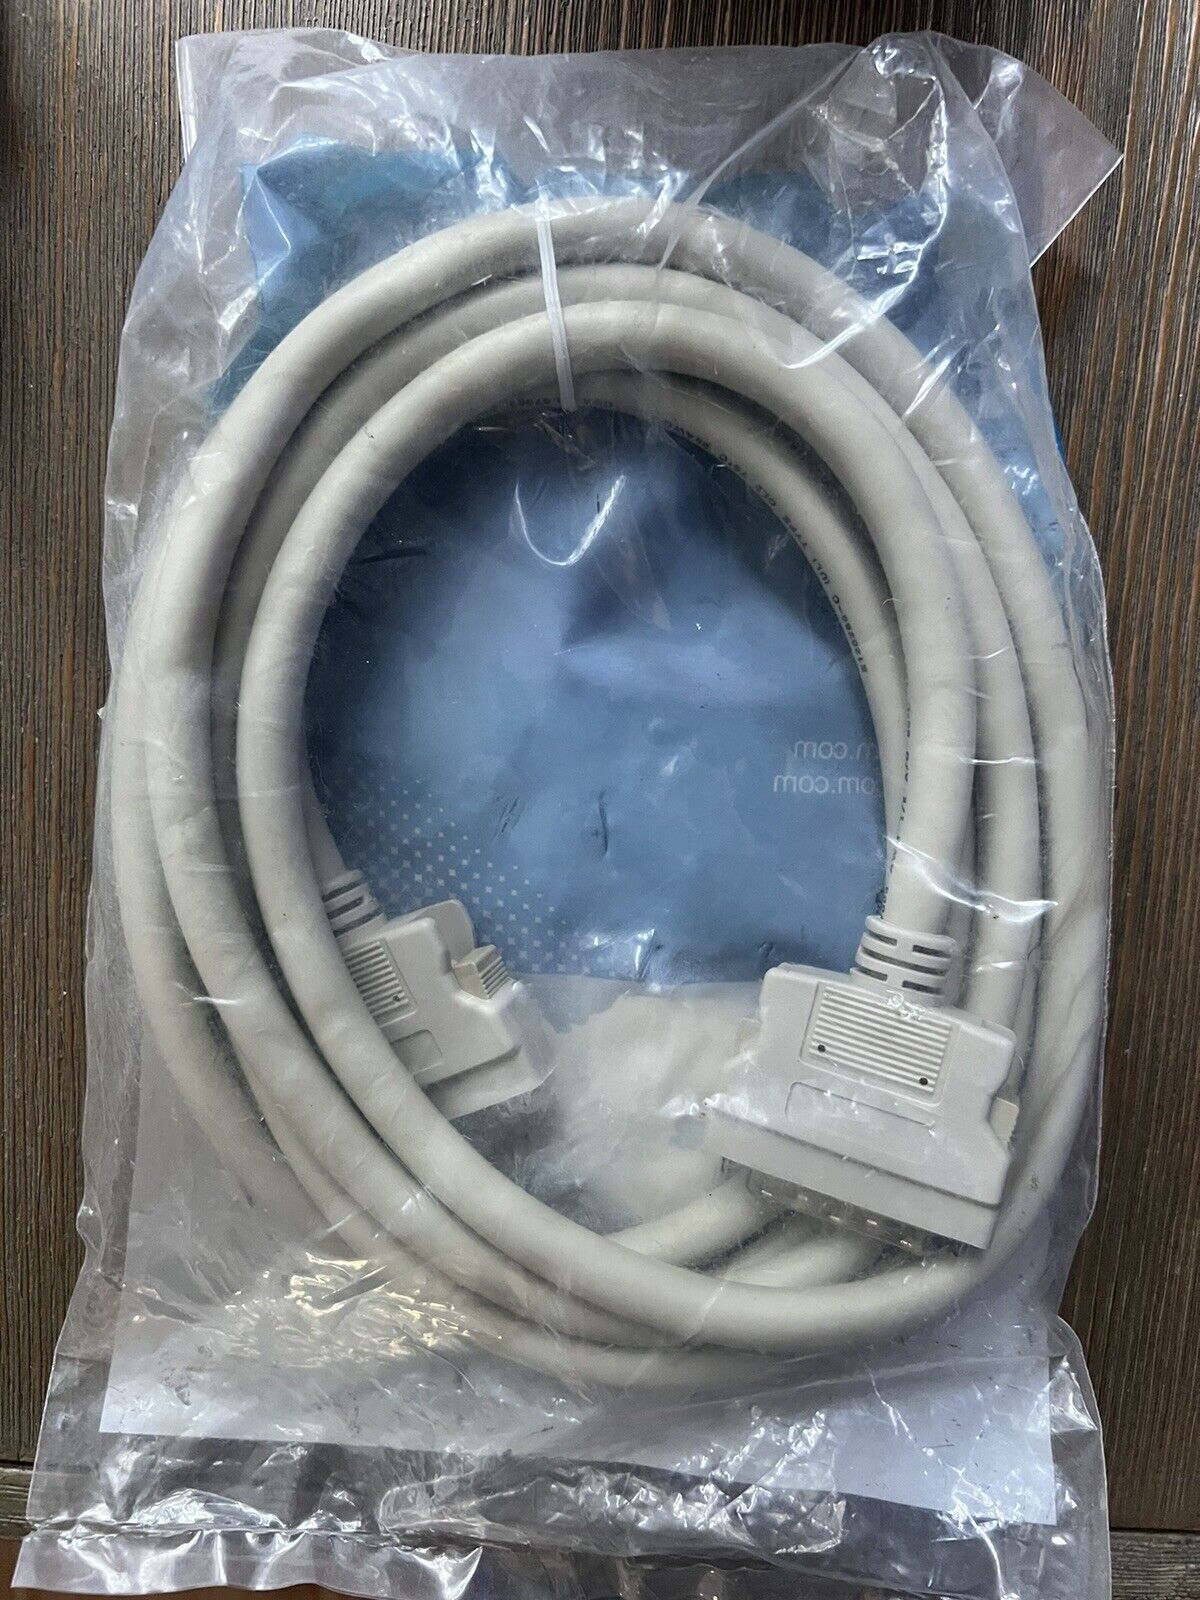 50 pin Half Pitch D Subminiature HPDB50 6 foot Male to Male SCSI Cable